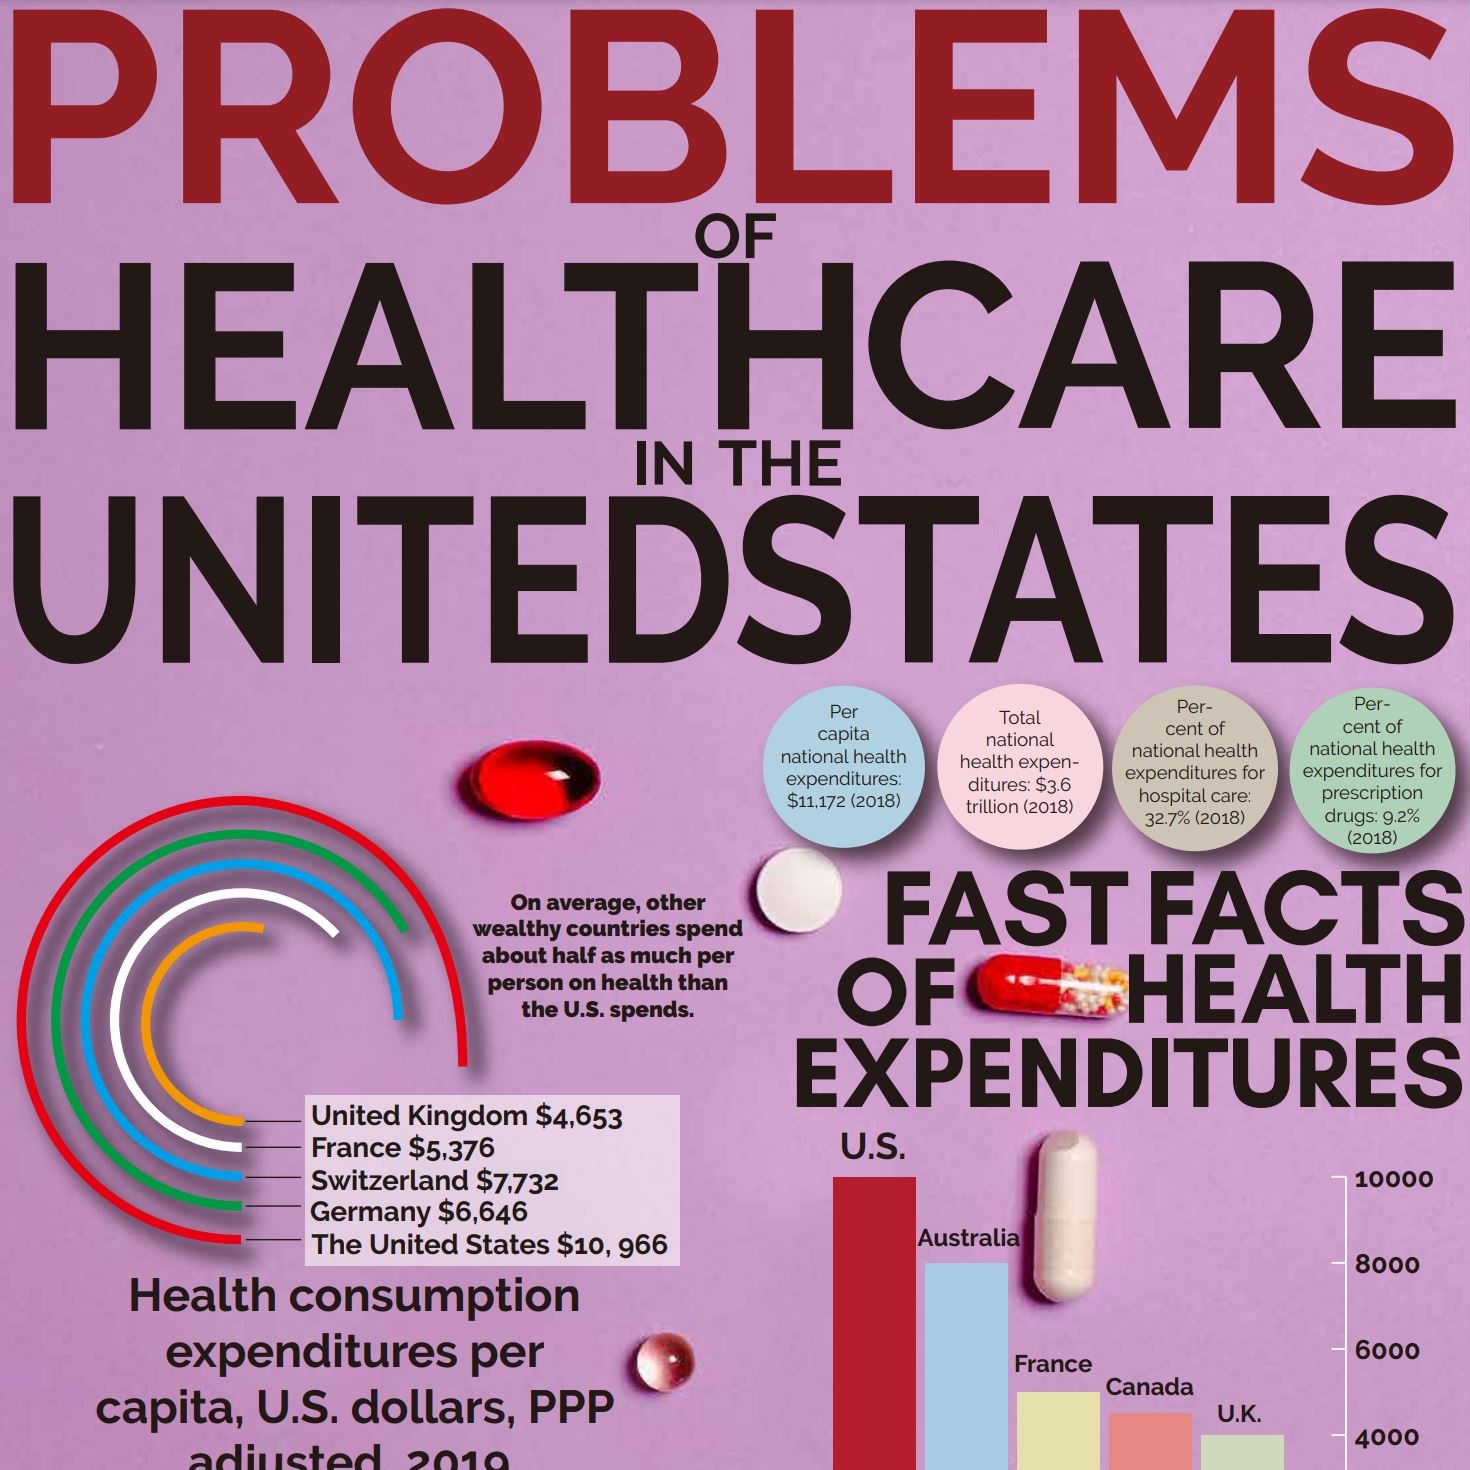 Problems of Healthcare in the United States